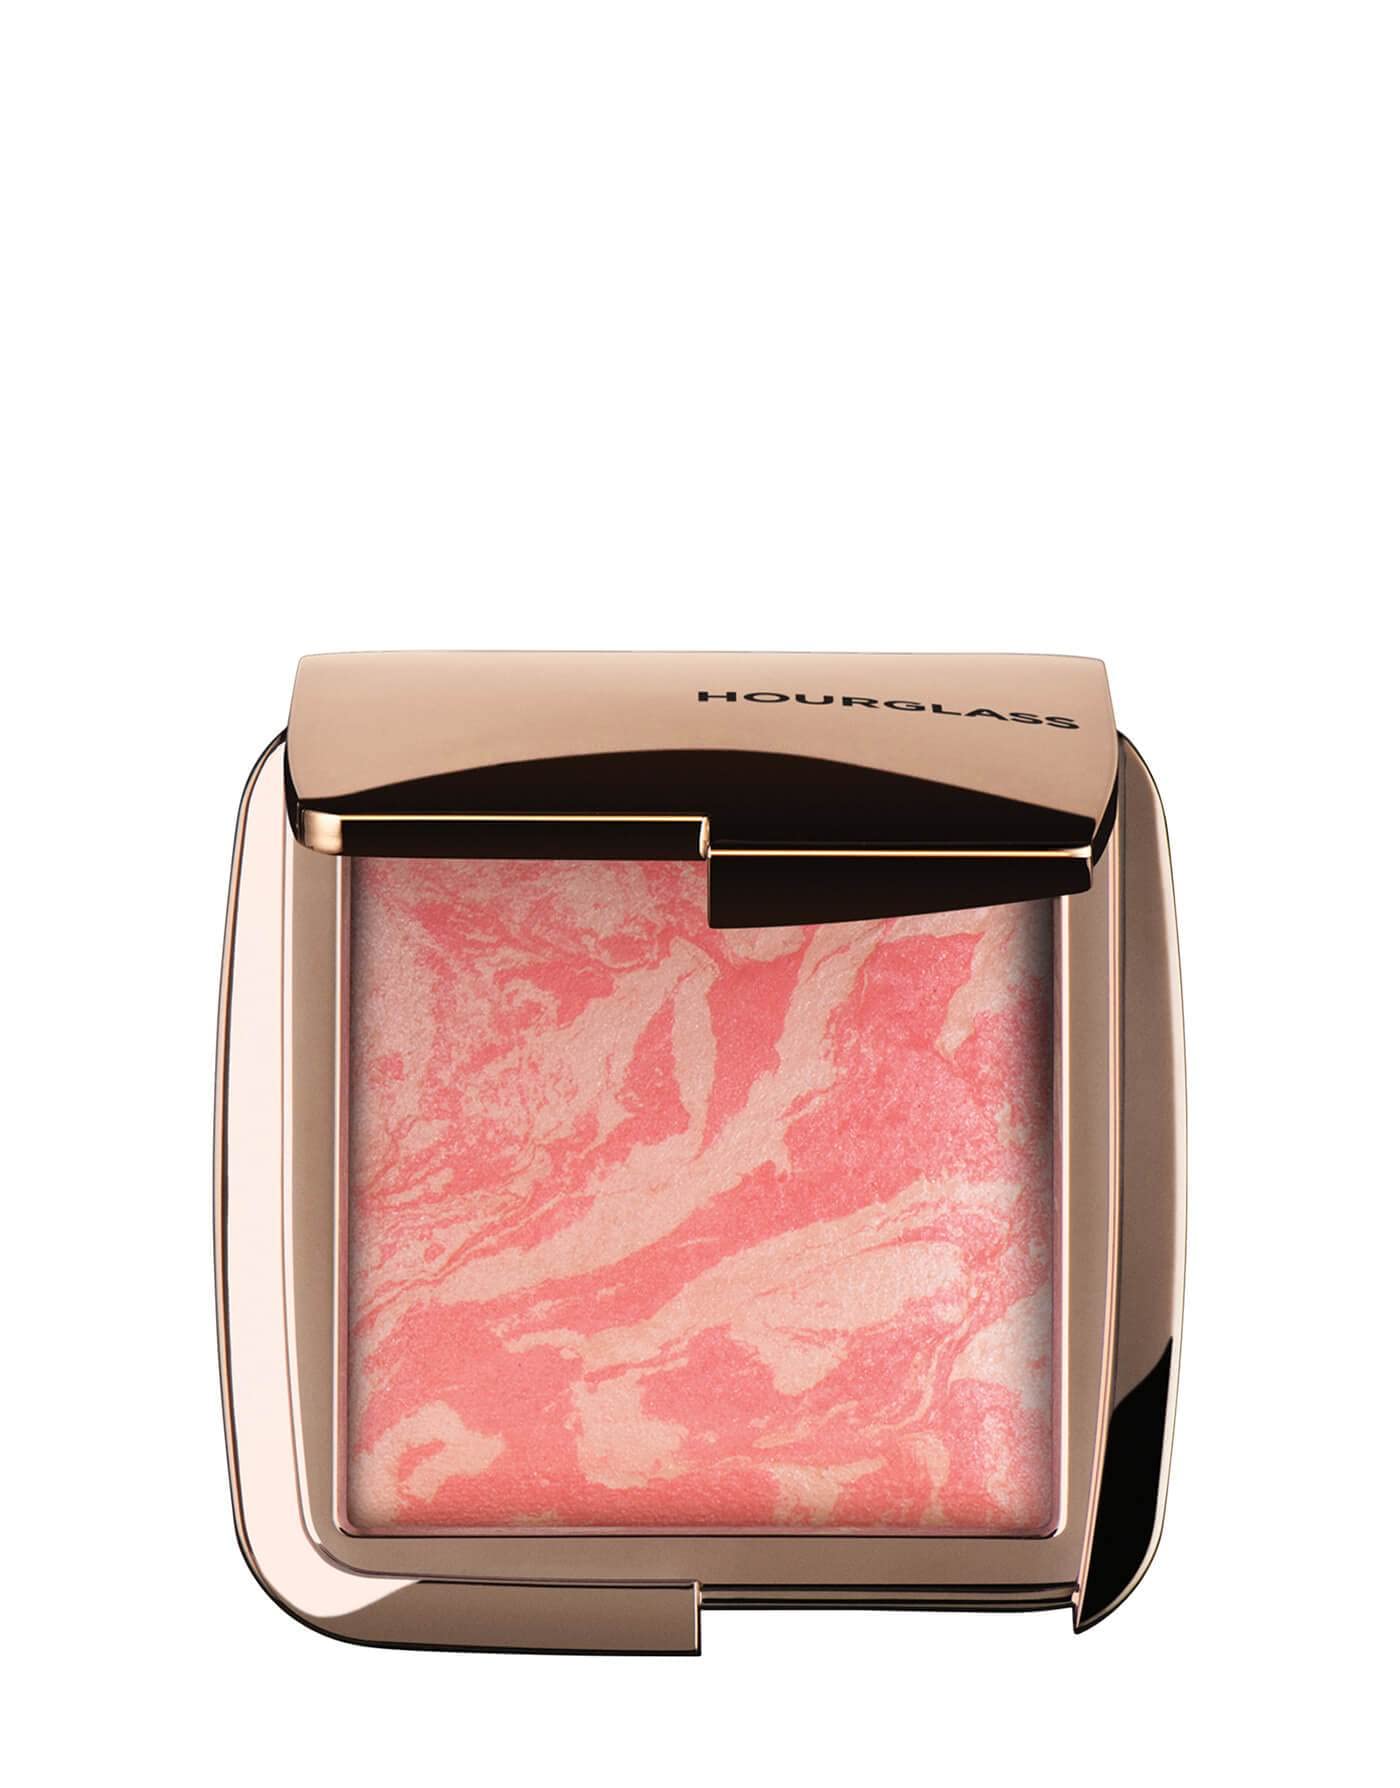 Hourglass Ambient Strobe Lighting Blush in Incandescent Electra. Vibrant Powder Highlighting Blush. Vegan and Cruelty-Free.